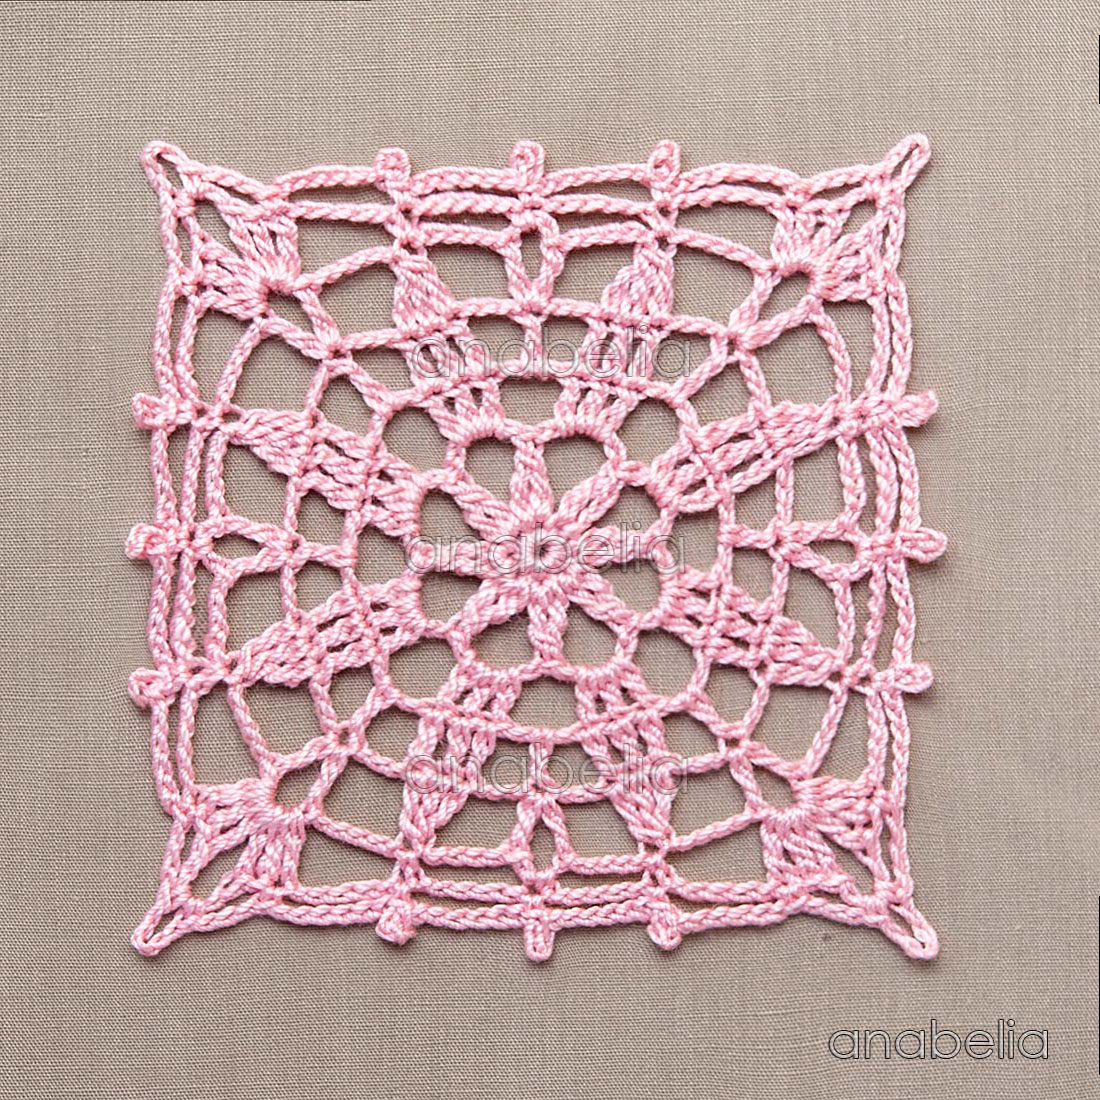 Crochet lace motifs in pink and white, free patterns | Anabelia Craft